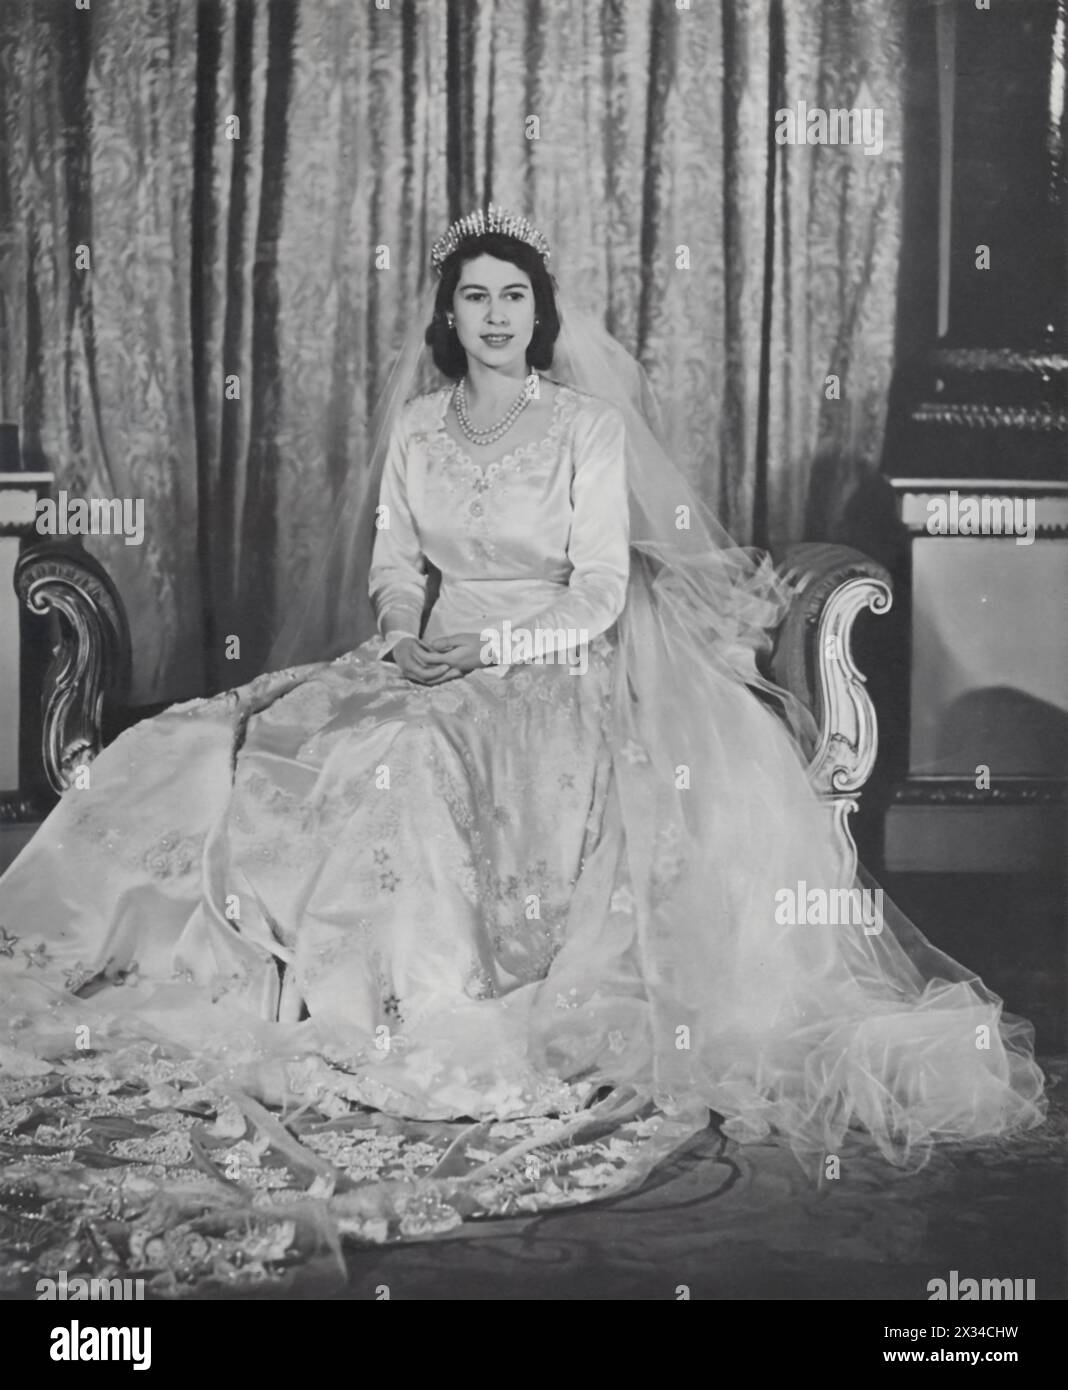 Princess Elizabeth is pictured in her wedding dress on the day she married Philip, the Duke of Edinburgh, on 20th November 1947. The following year, they welcomed their first son, Prince Charles, marking a new generation in the British monarchy. Elizabeth ascended to the throne in 1952, signaling a pivotal shift in royal leadership. Stock Photo